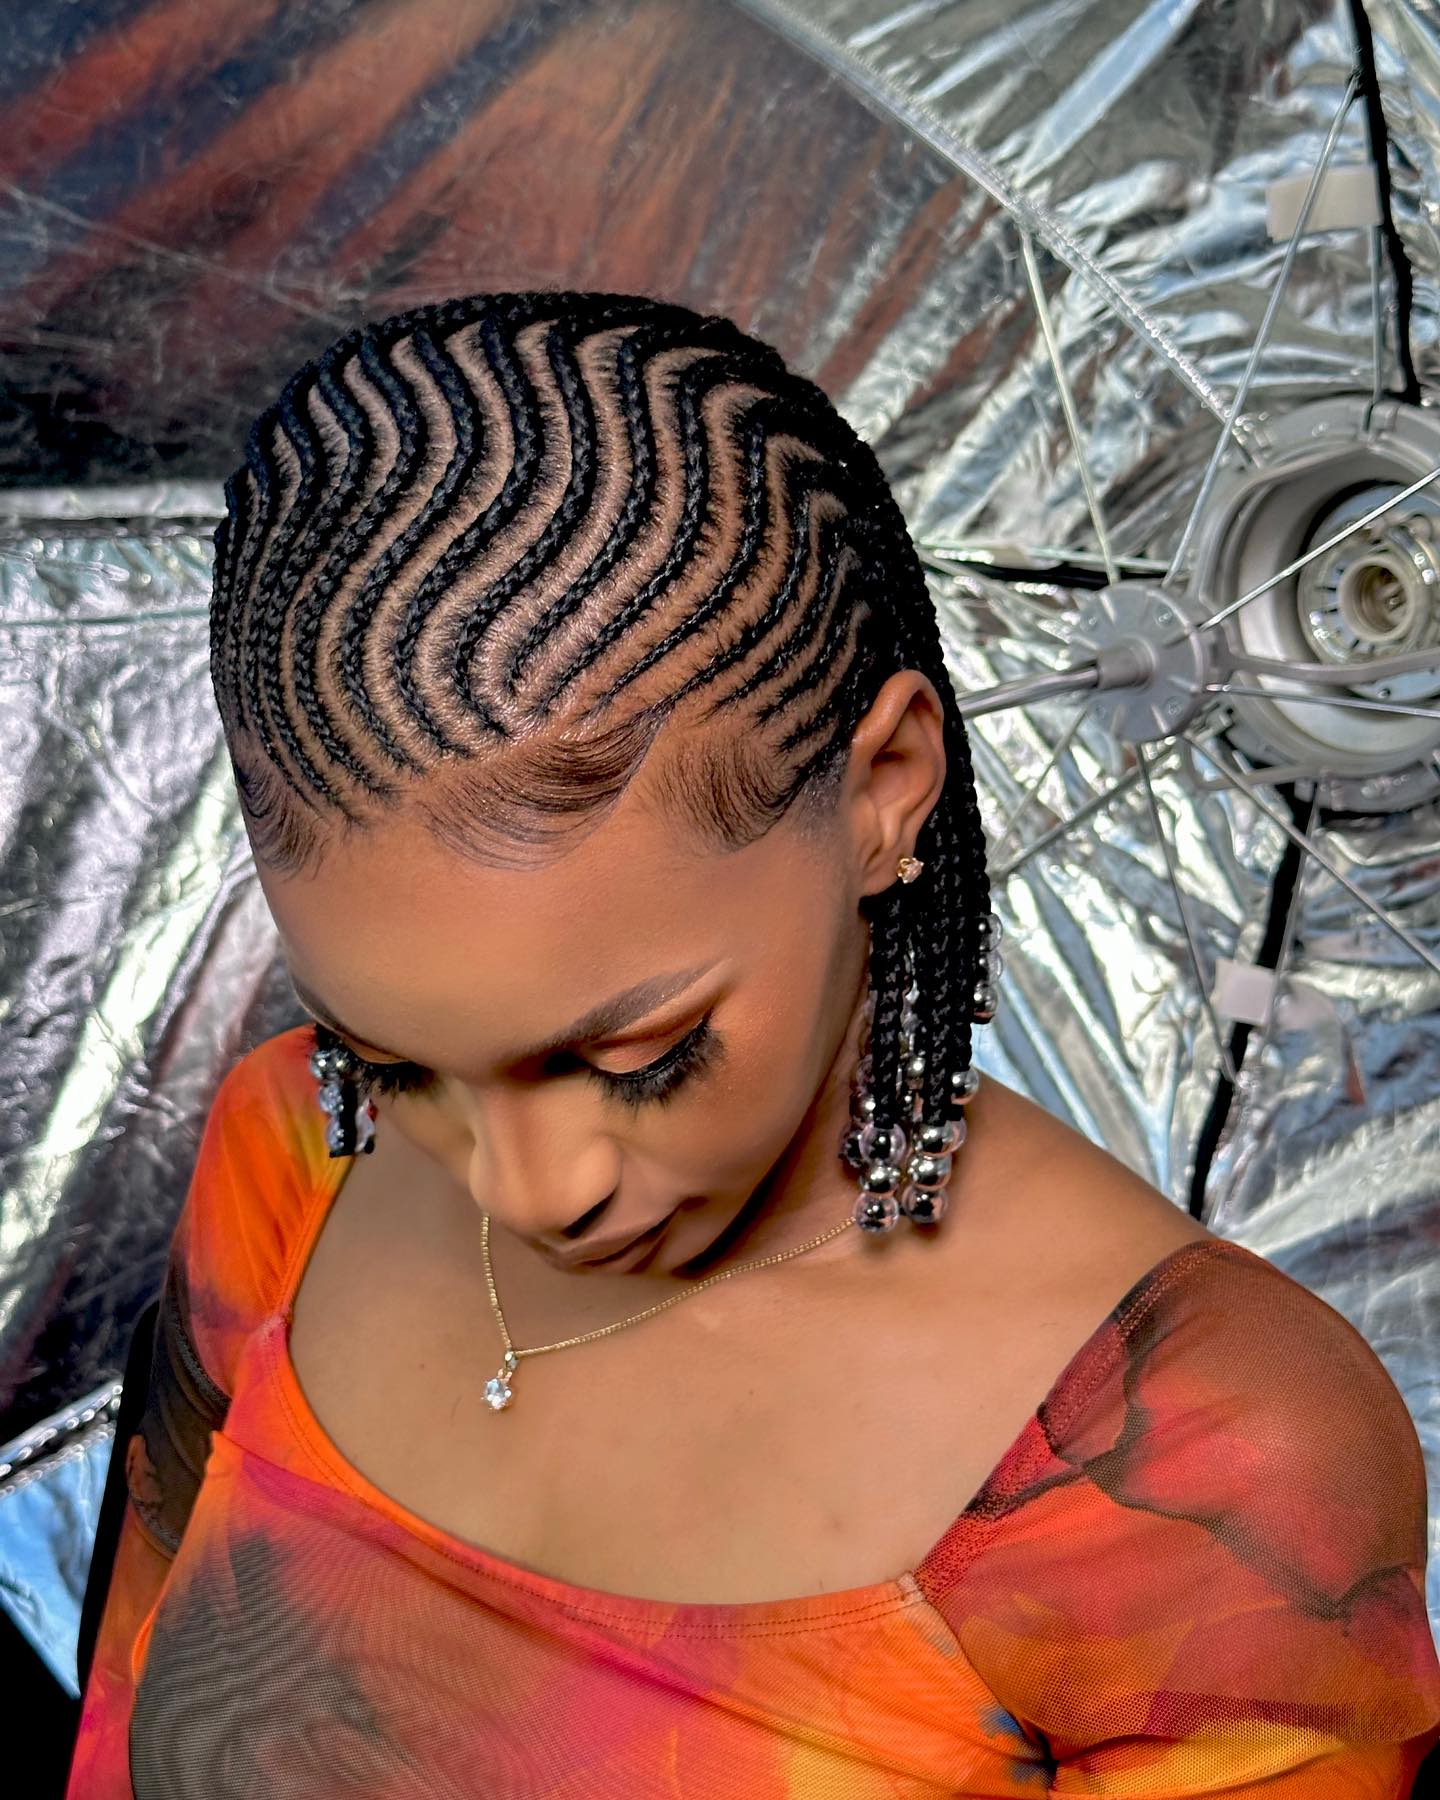 40 Captivating African Braids Hairstyles: Fresh Ideas for Striking Looks